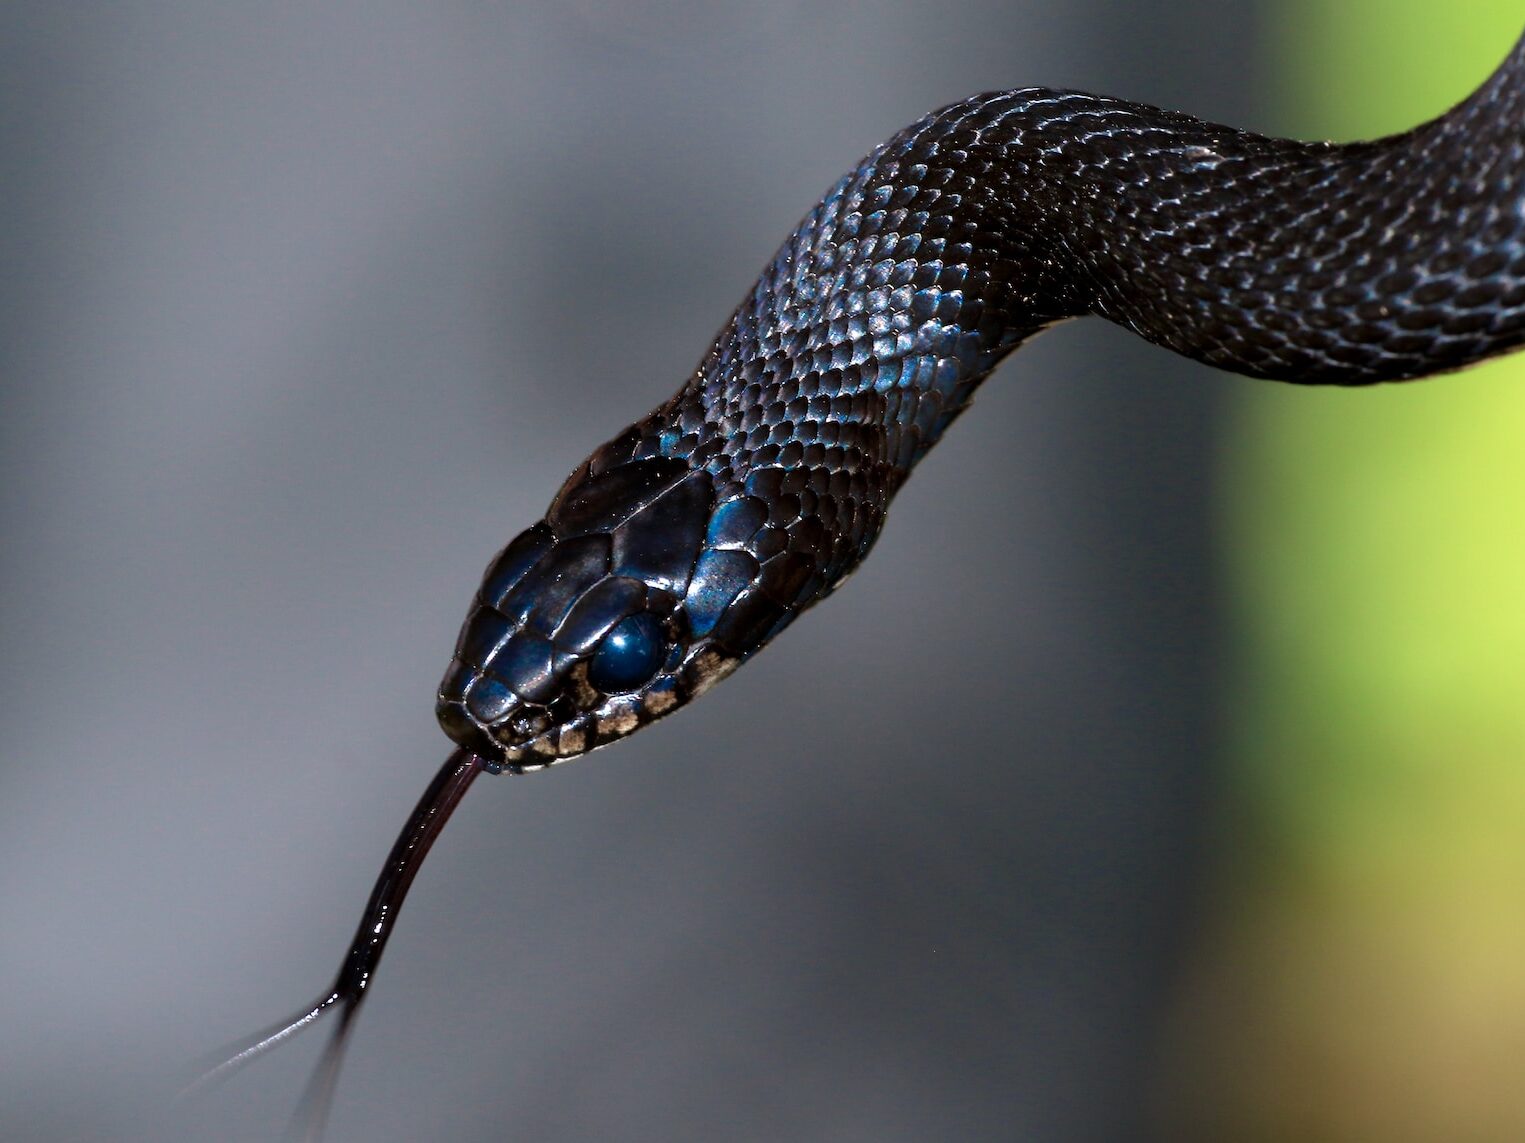 black and brown snake in close up photography